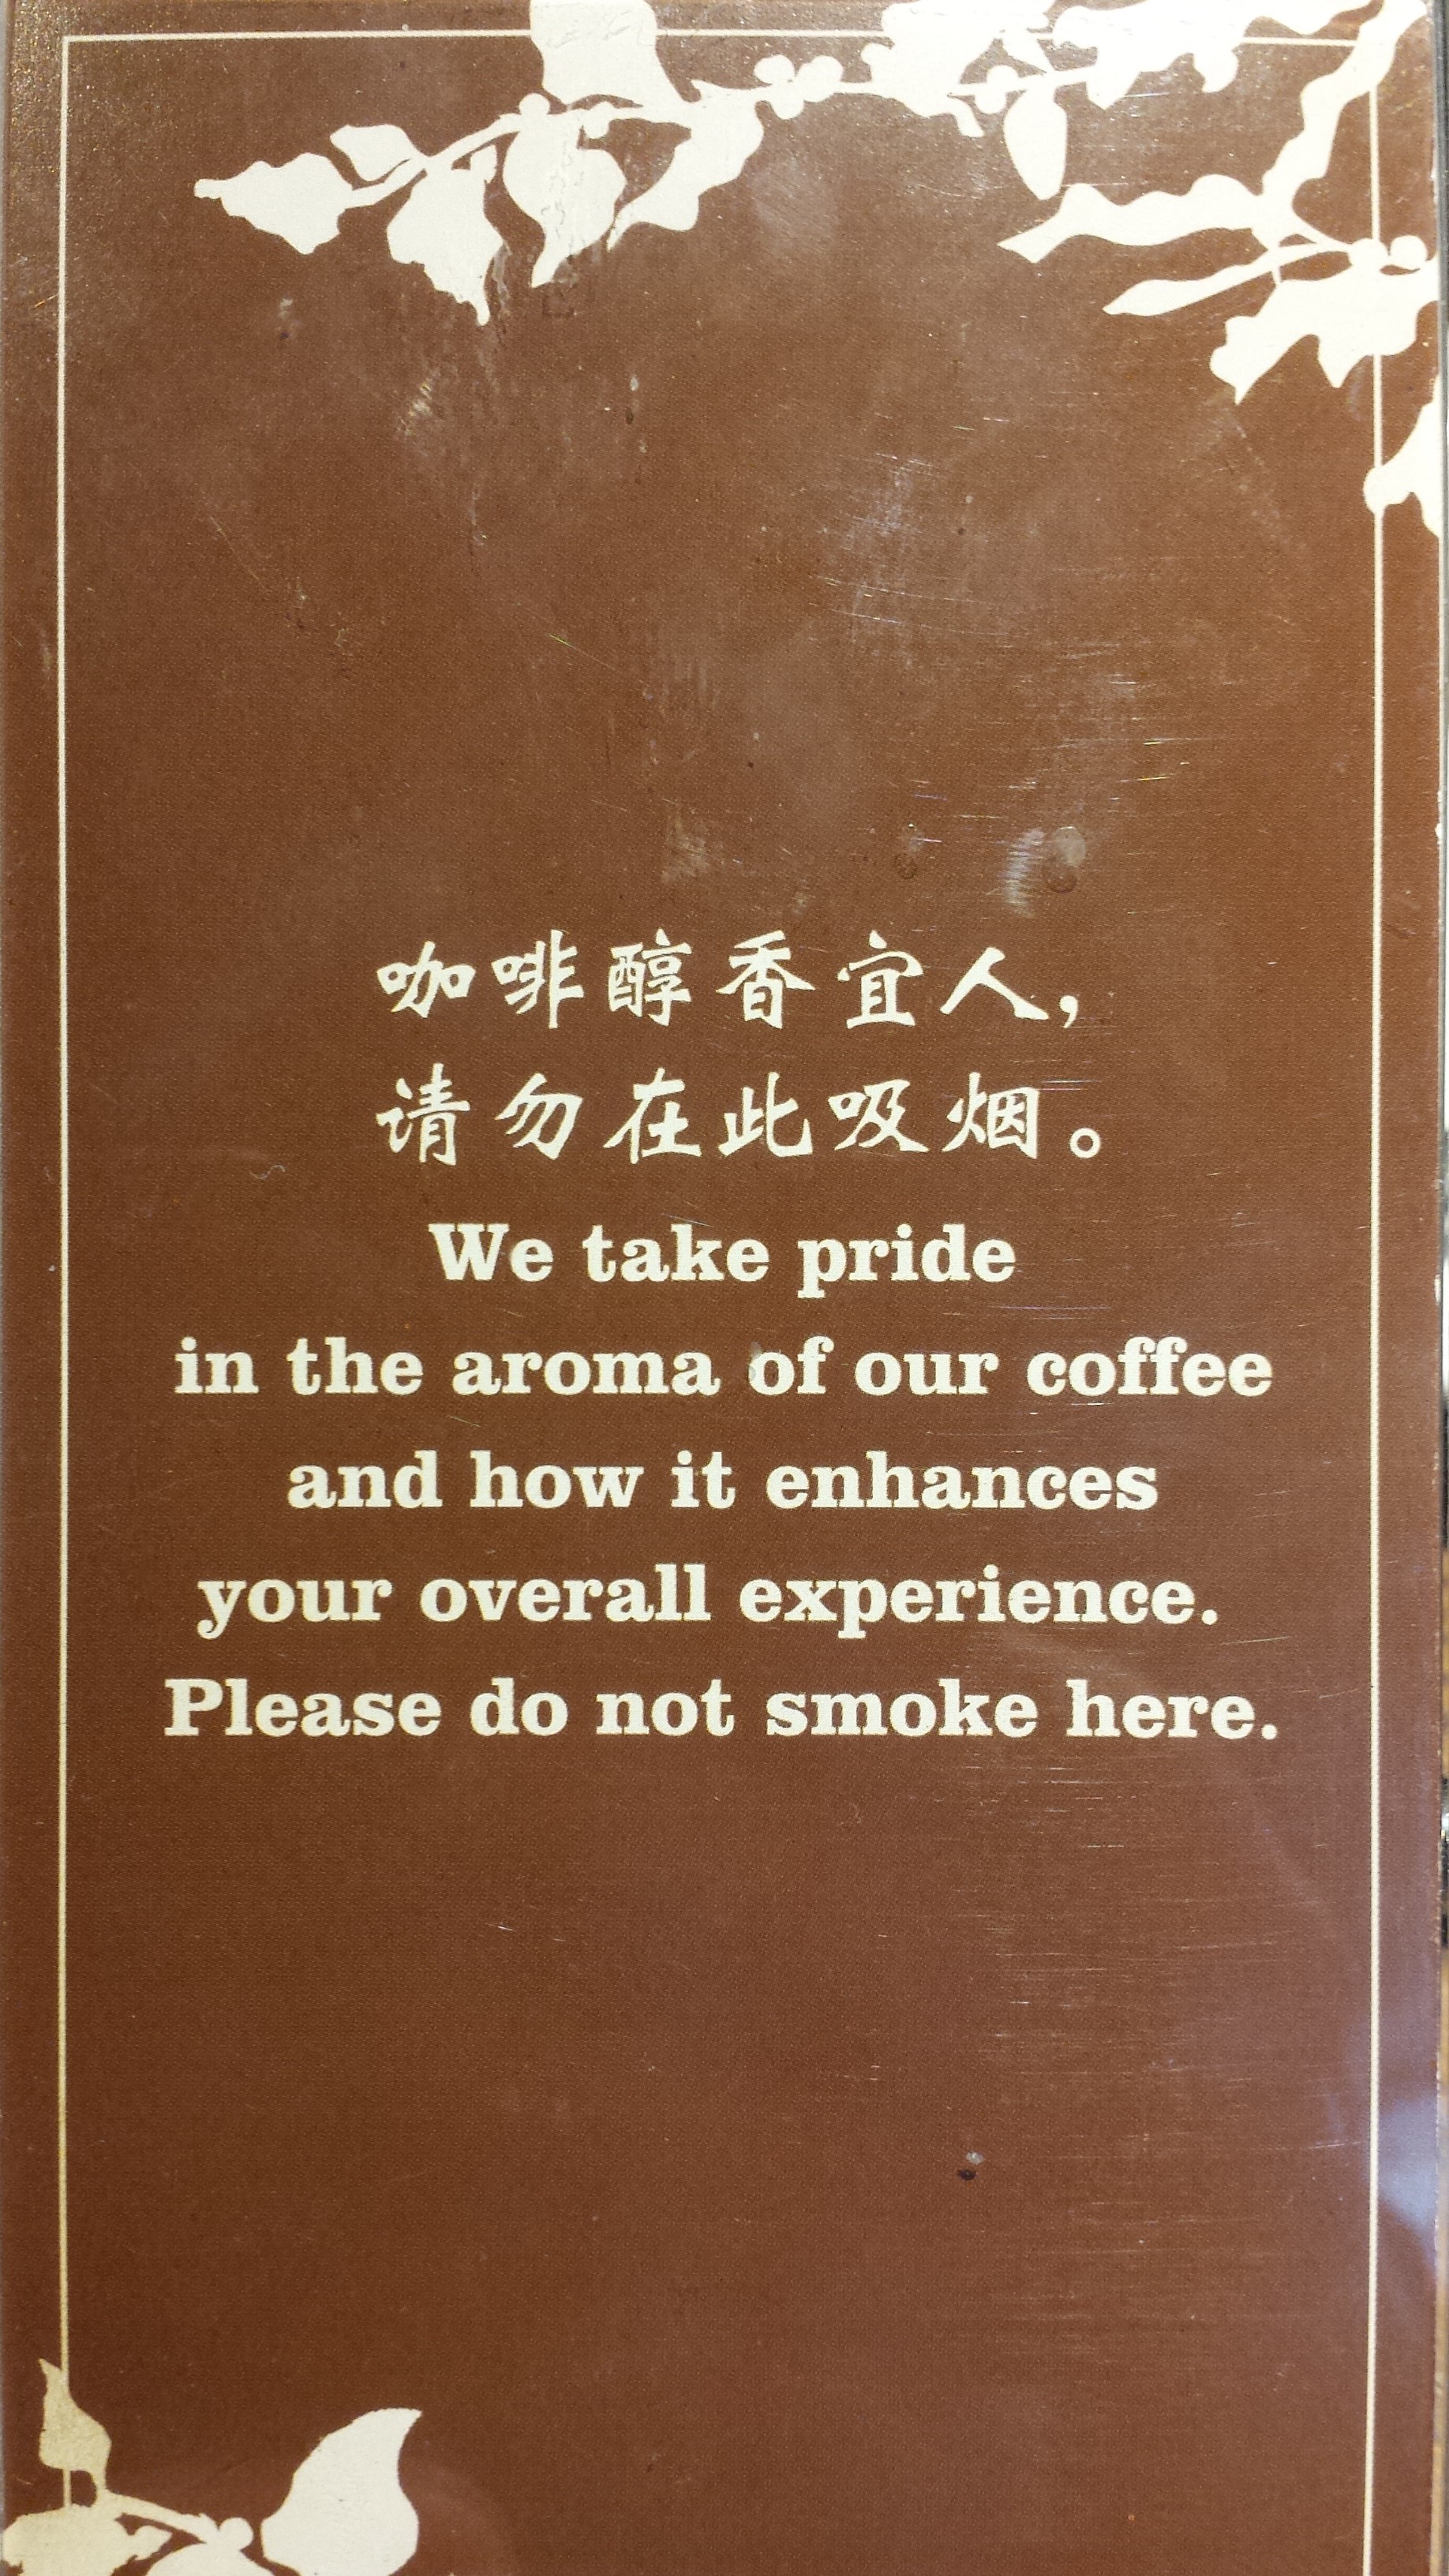 It's like they understand coffee here!  Also...it's nice to get away from the smokey haze that seems to be everywhere in Guiyang